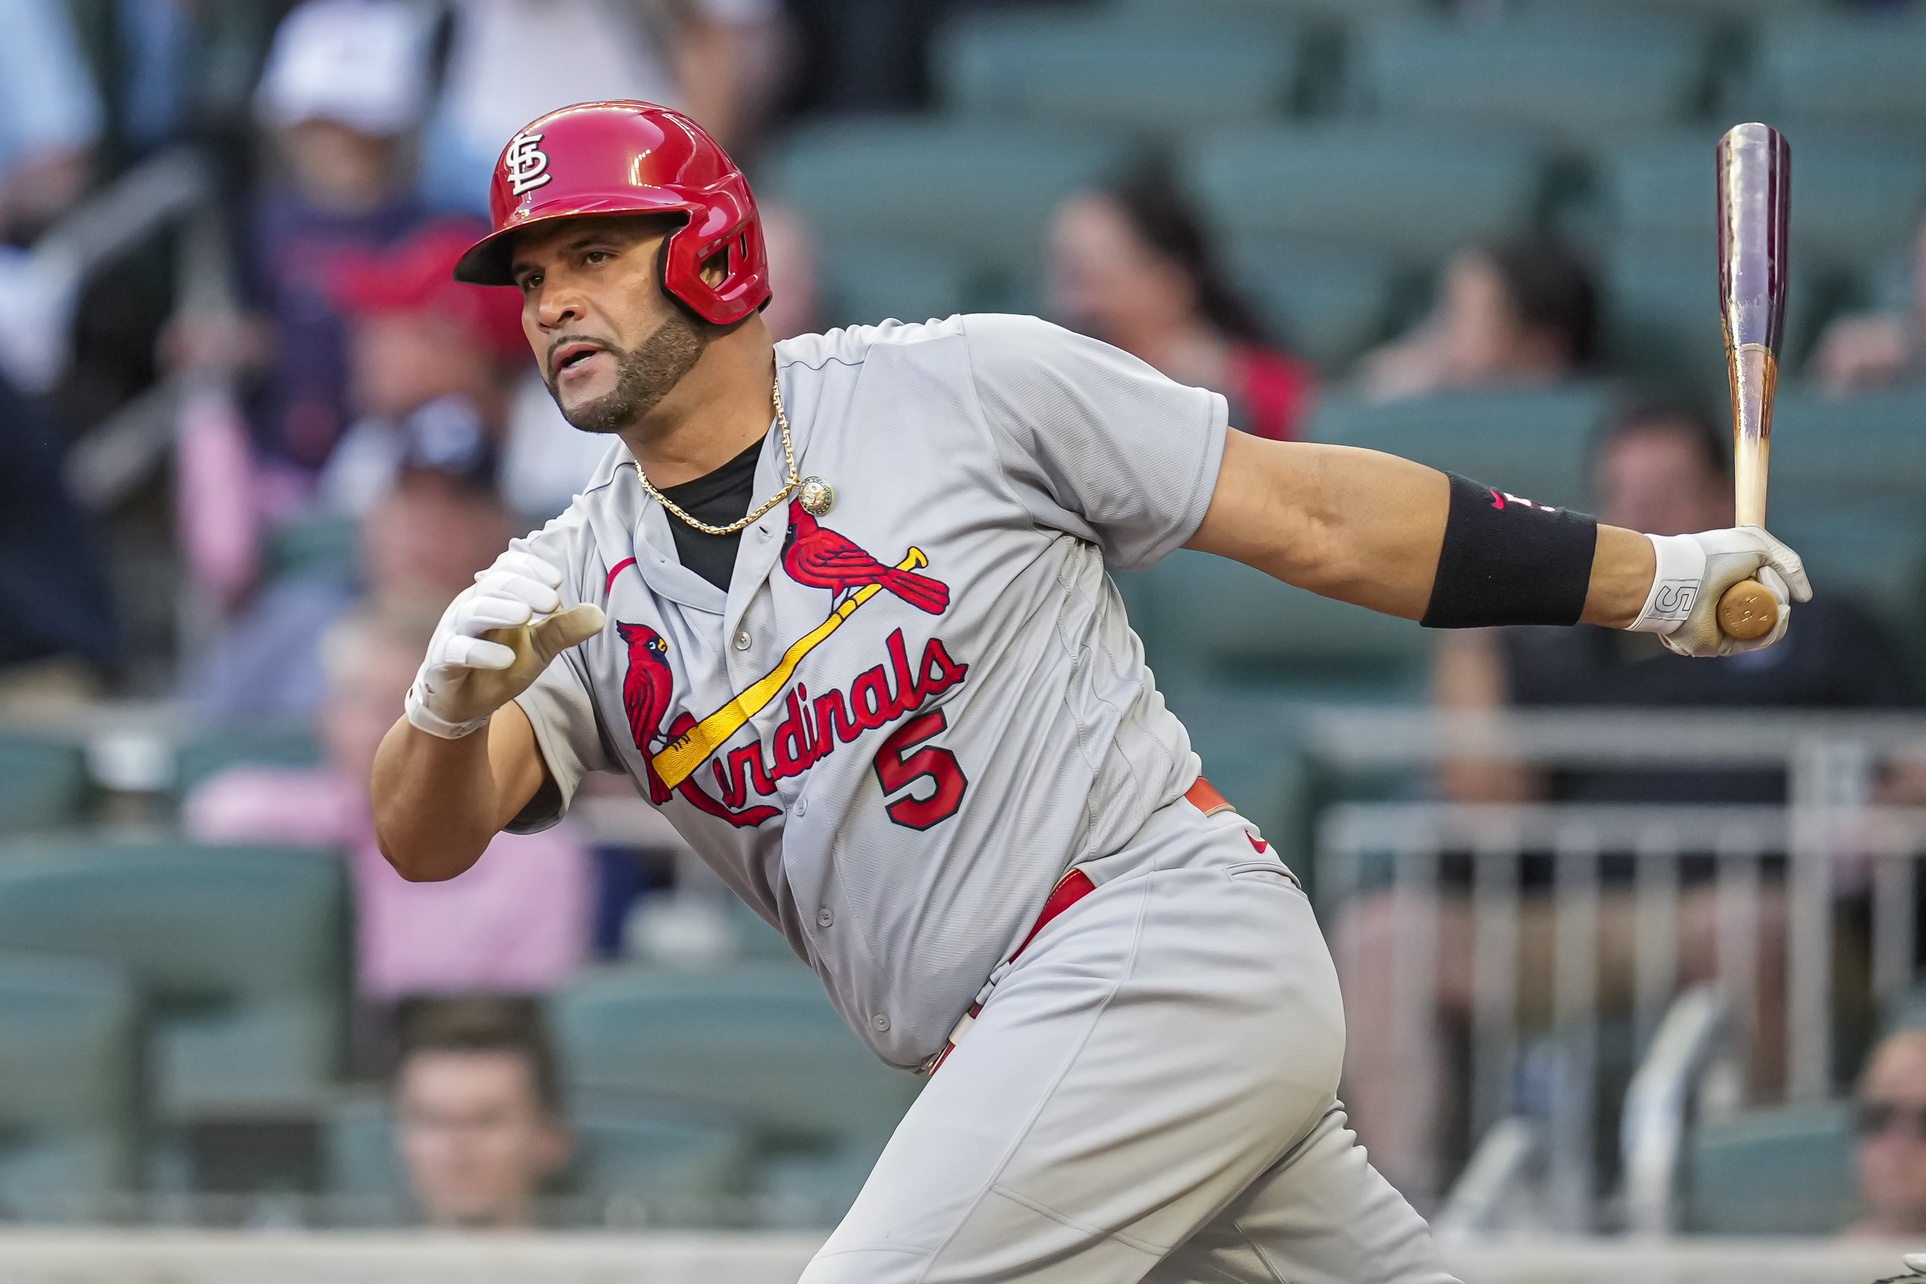 Bernie: Cardinals Manager Oli Marmol Made The Right Call To Pinch